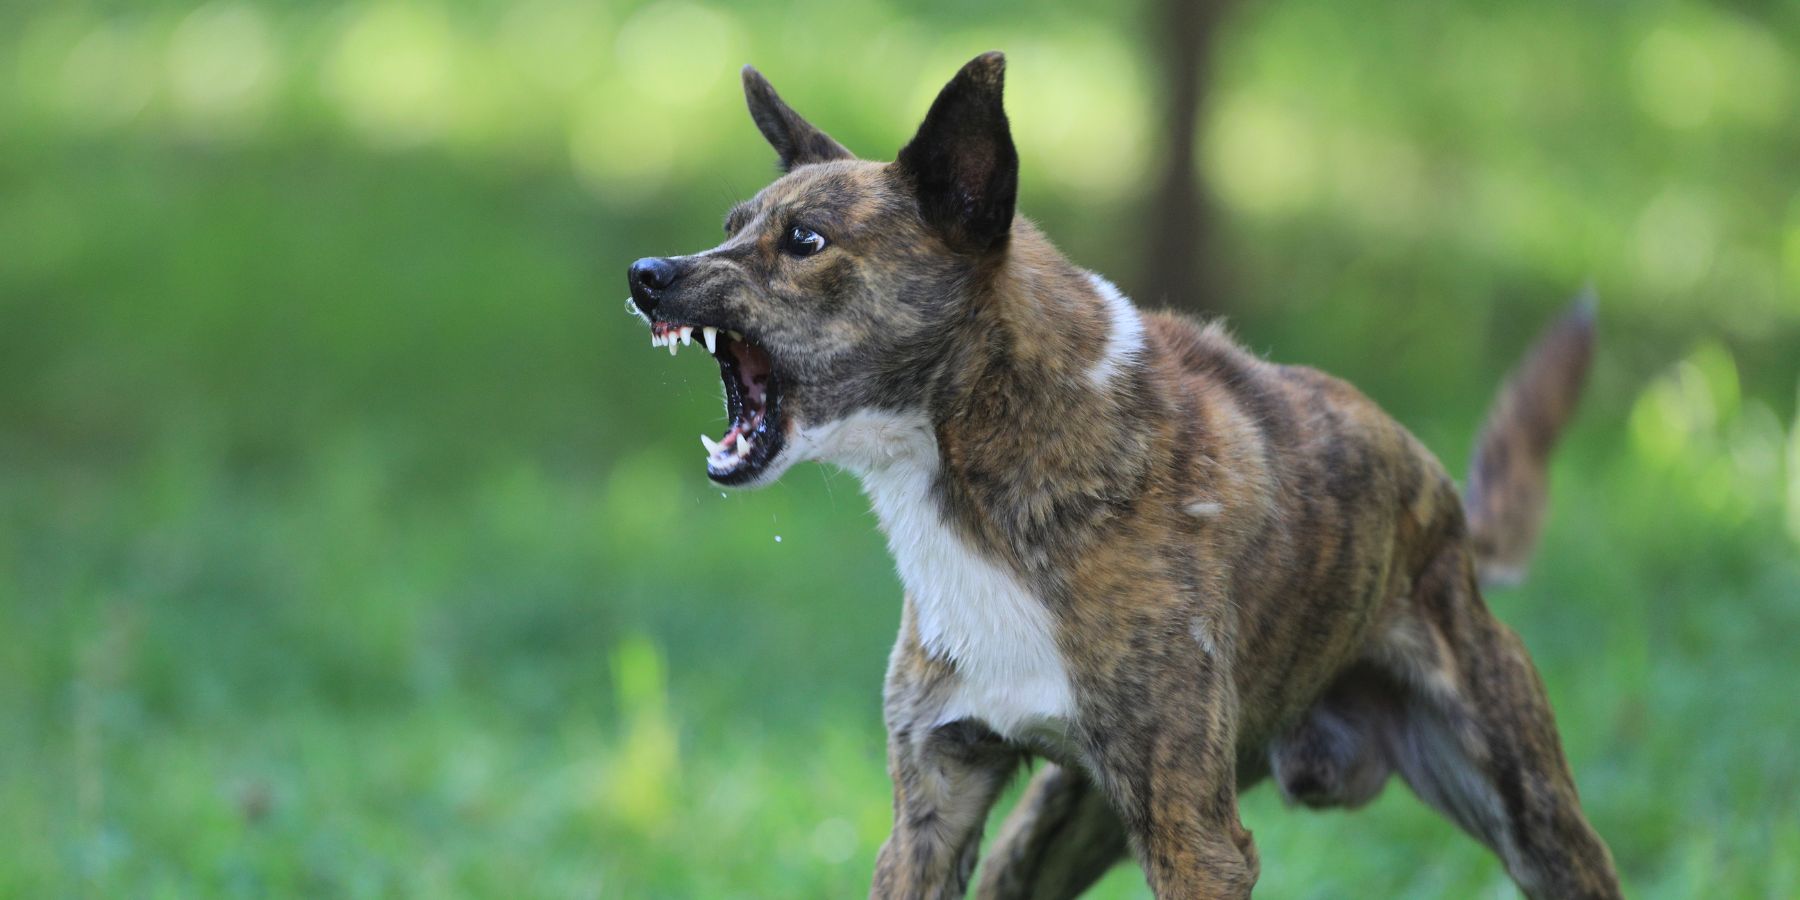 Creating a Safe Environment for Aggressive Dogs